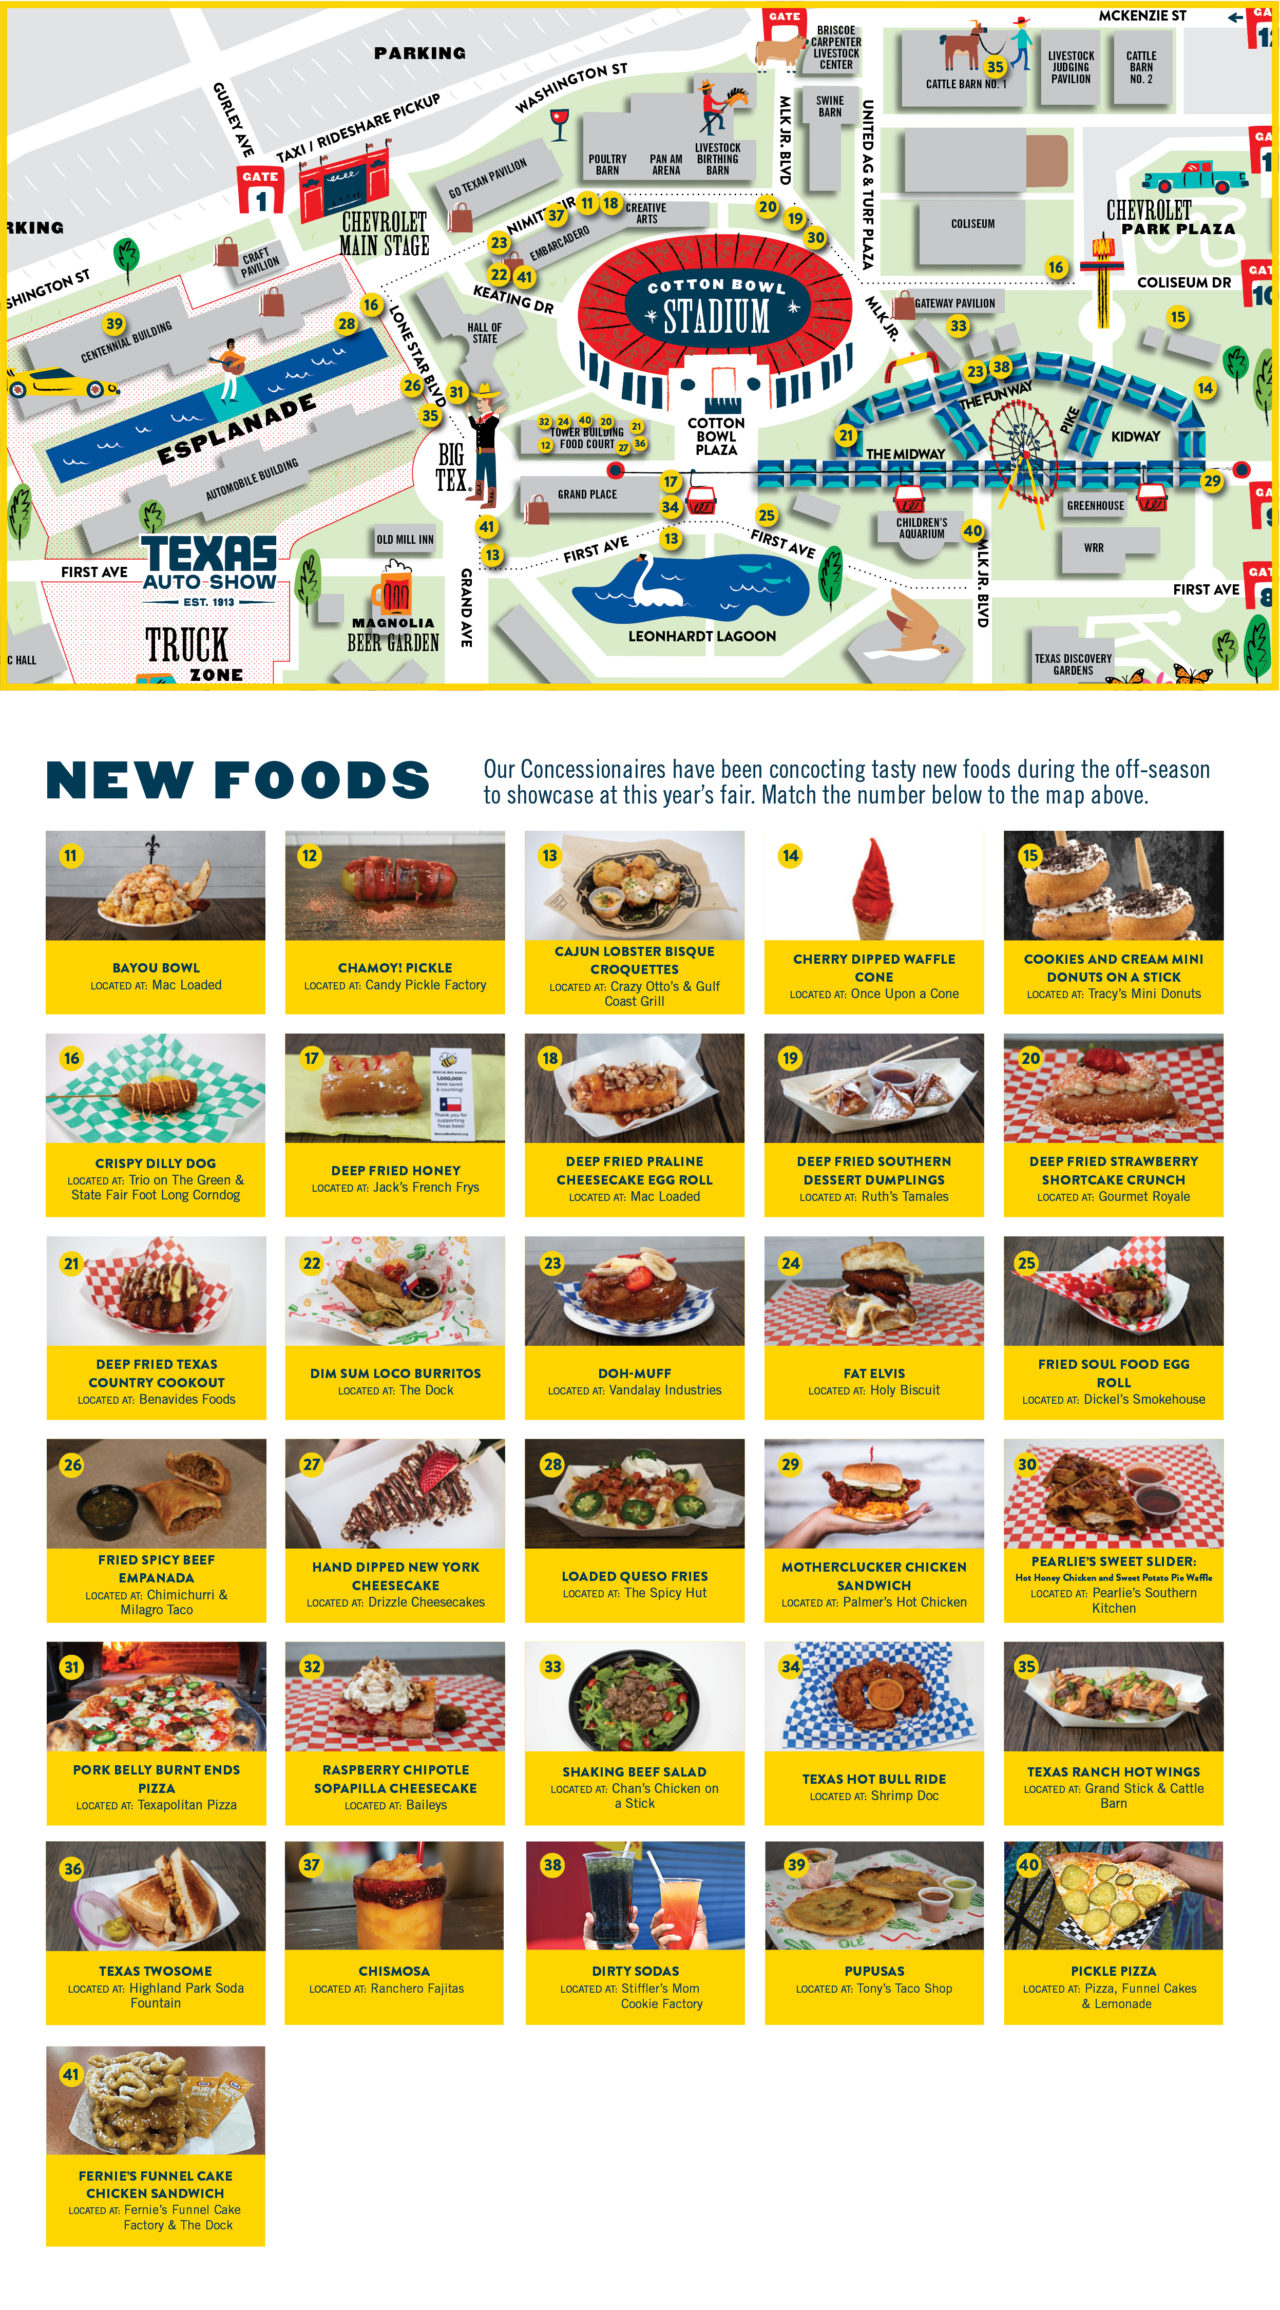 New Foods Map | State Fair of Texas